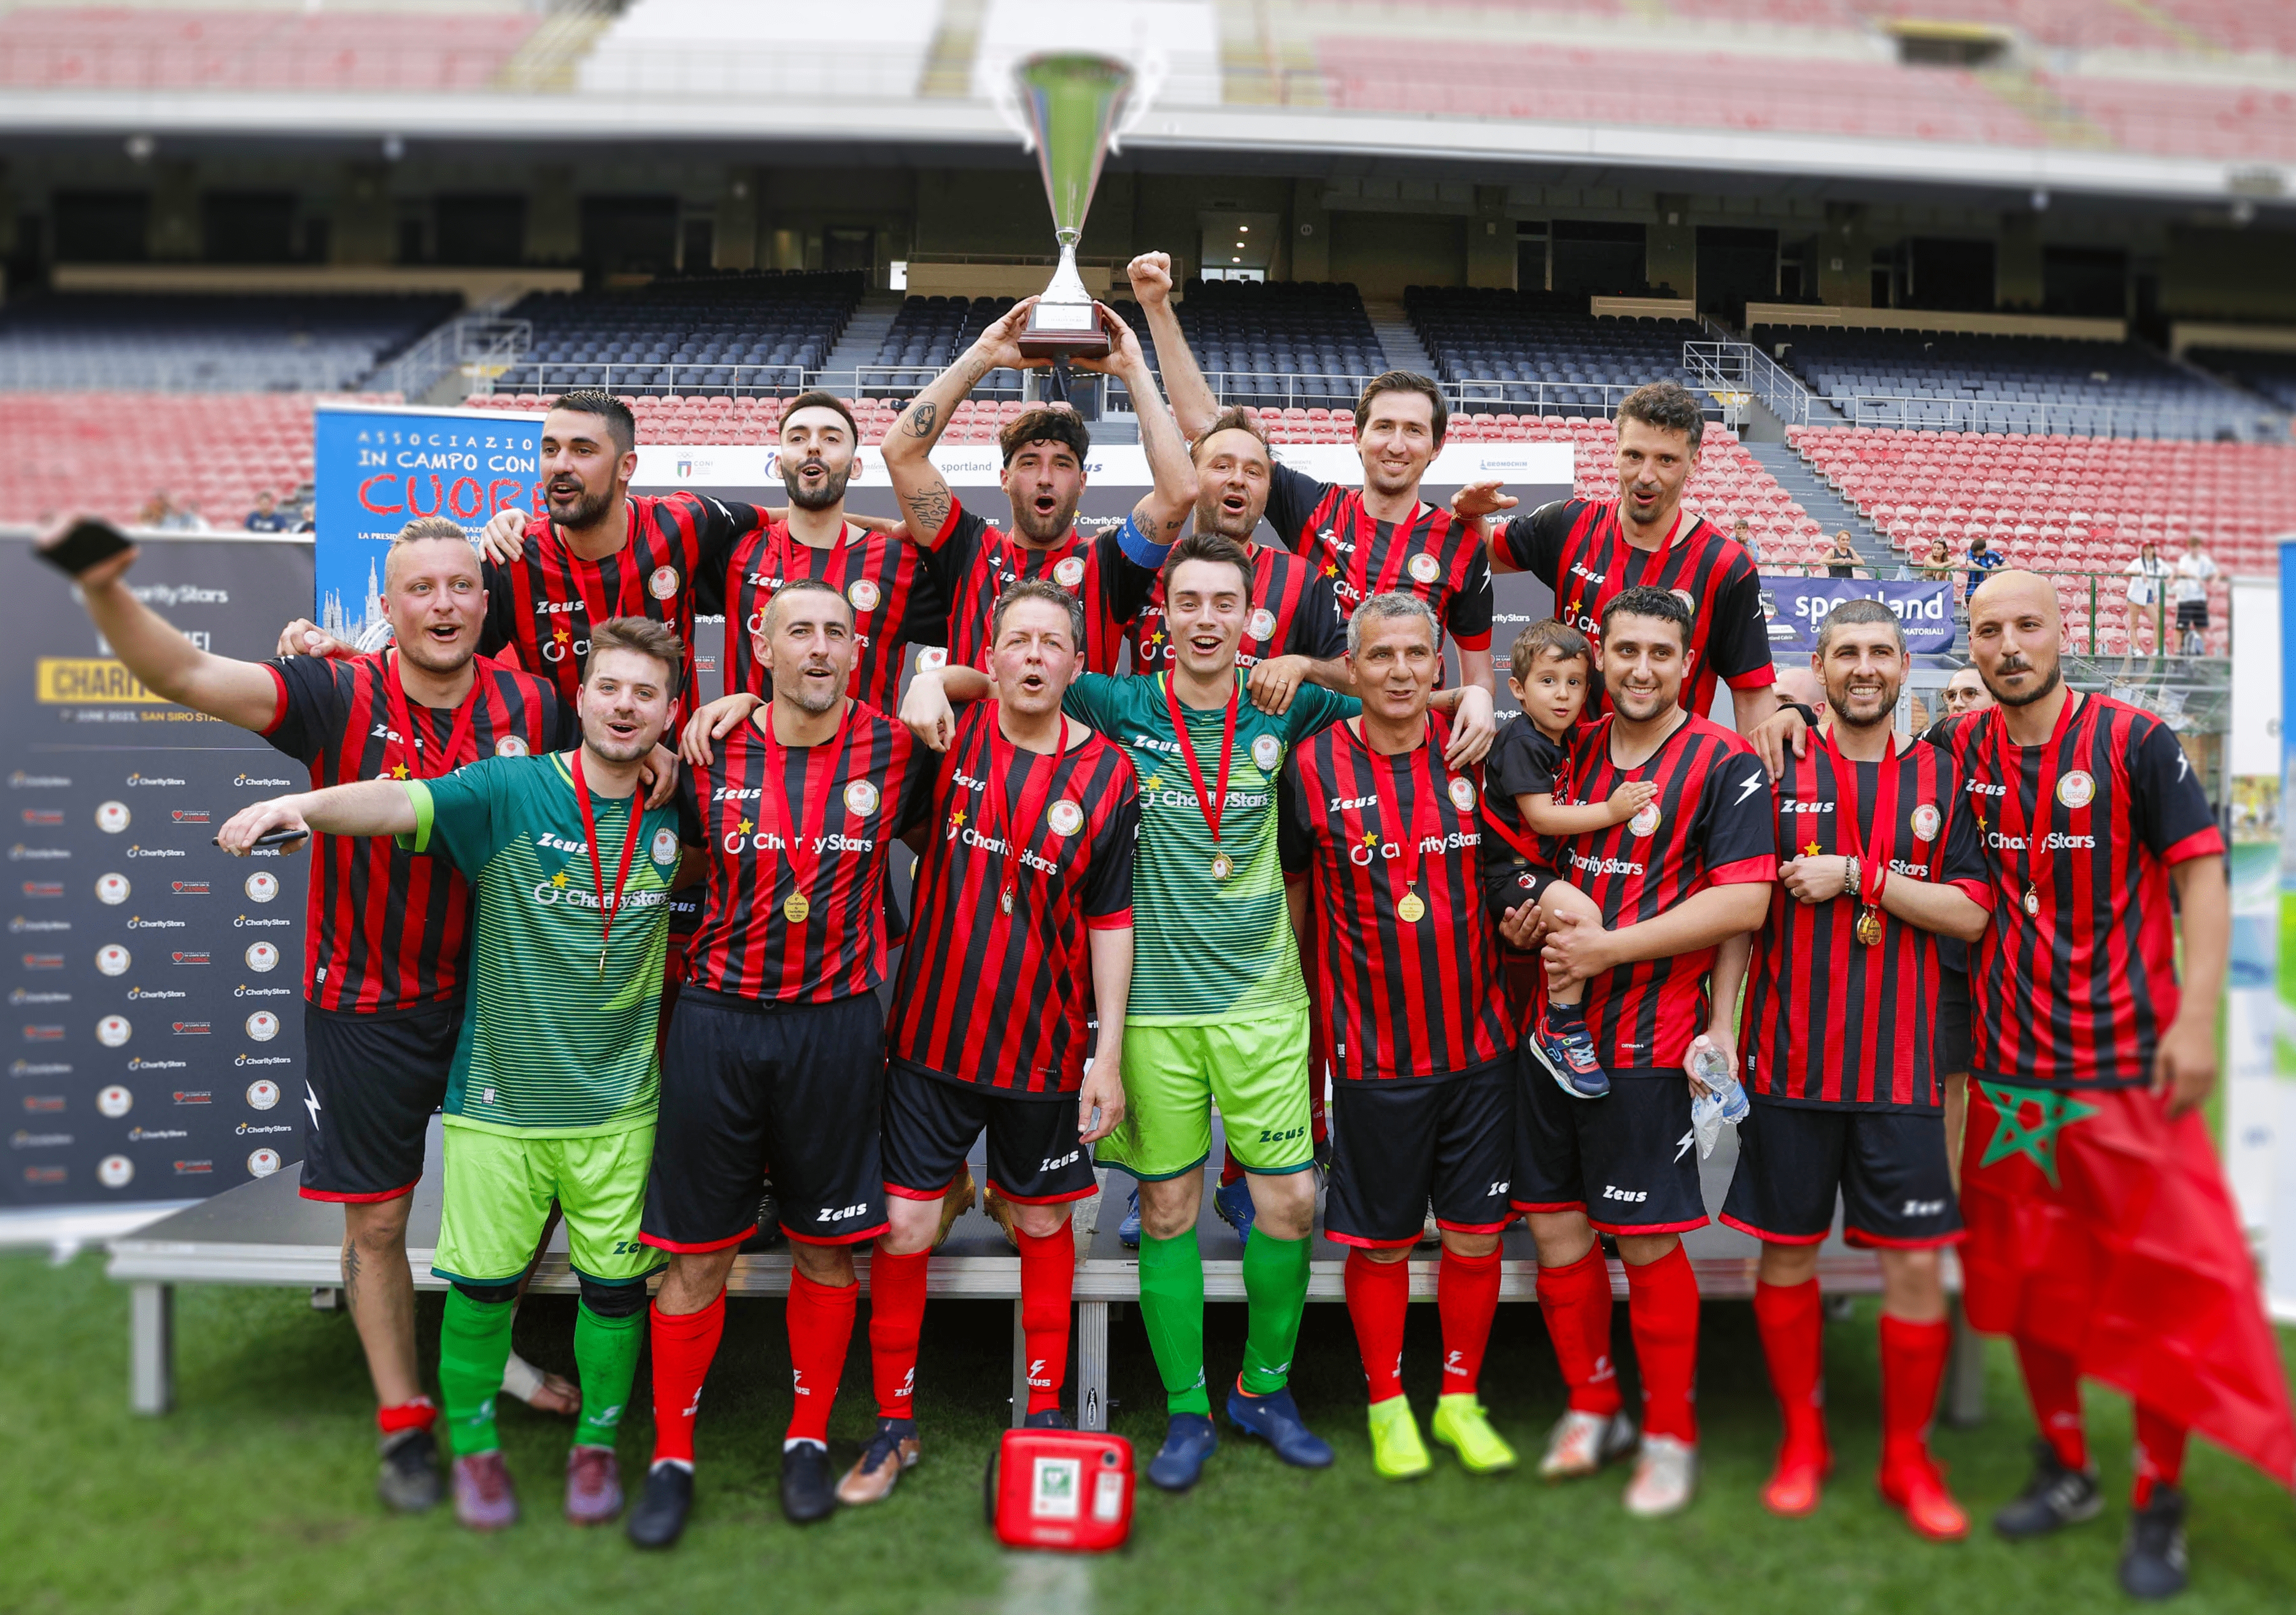 Rossoneri team celebrating as they raise the CharityDerby trophy